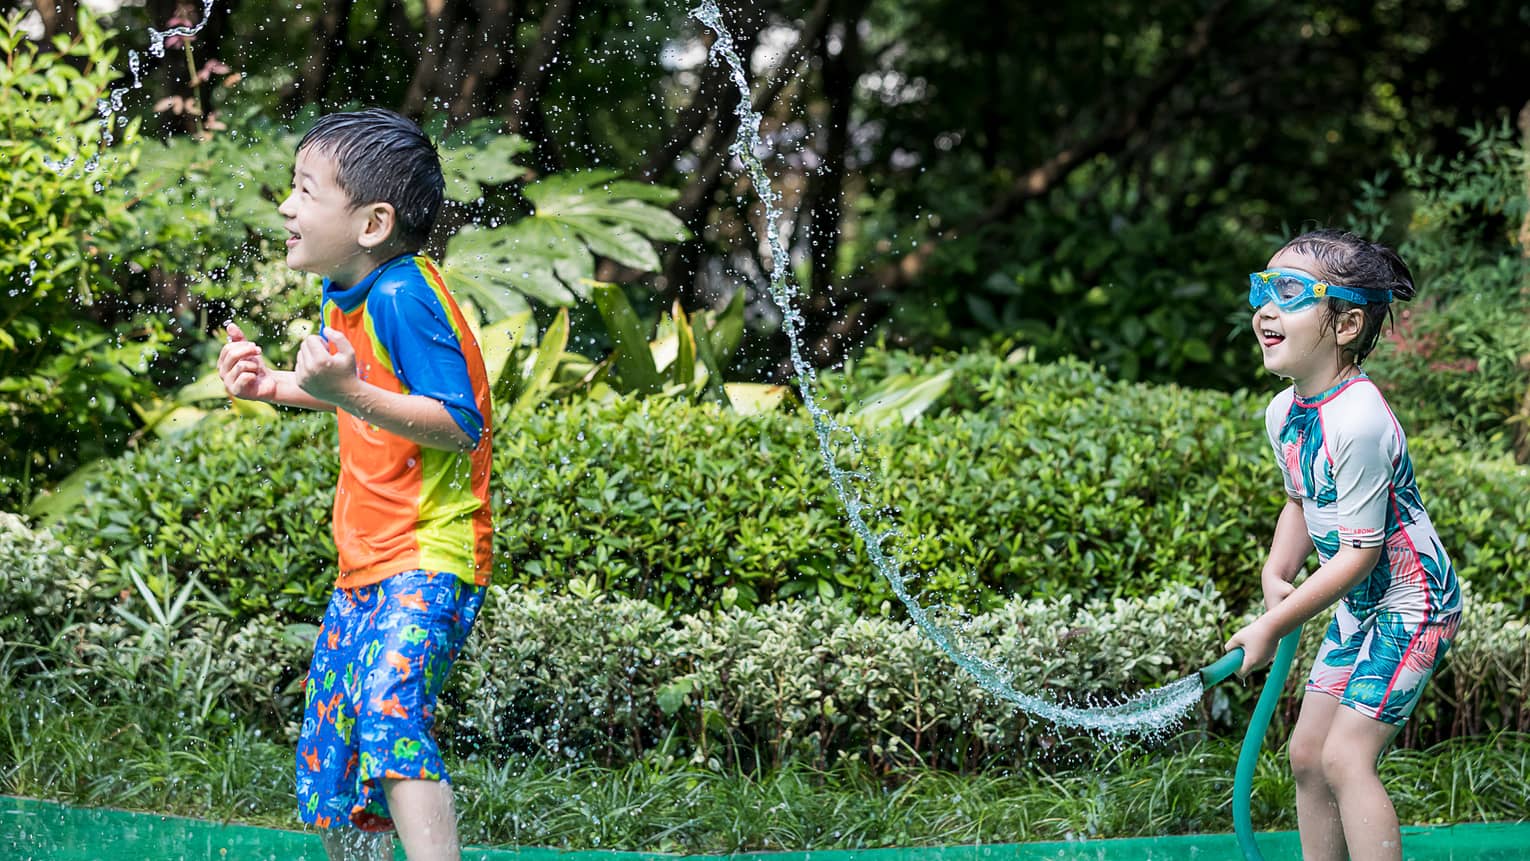 Young girl wearing swimsuit, goggles sprays boy with garden hose